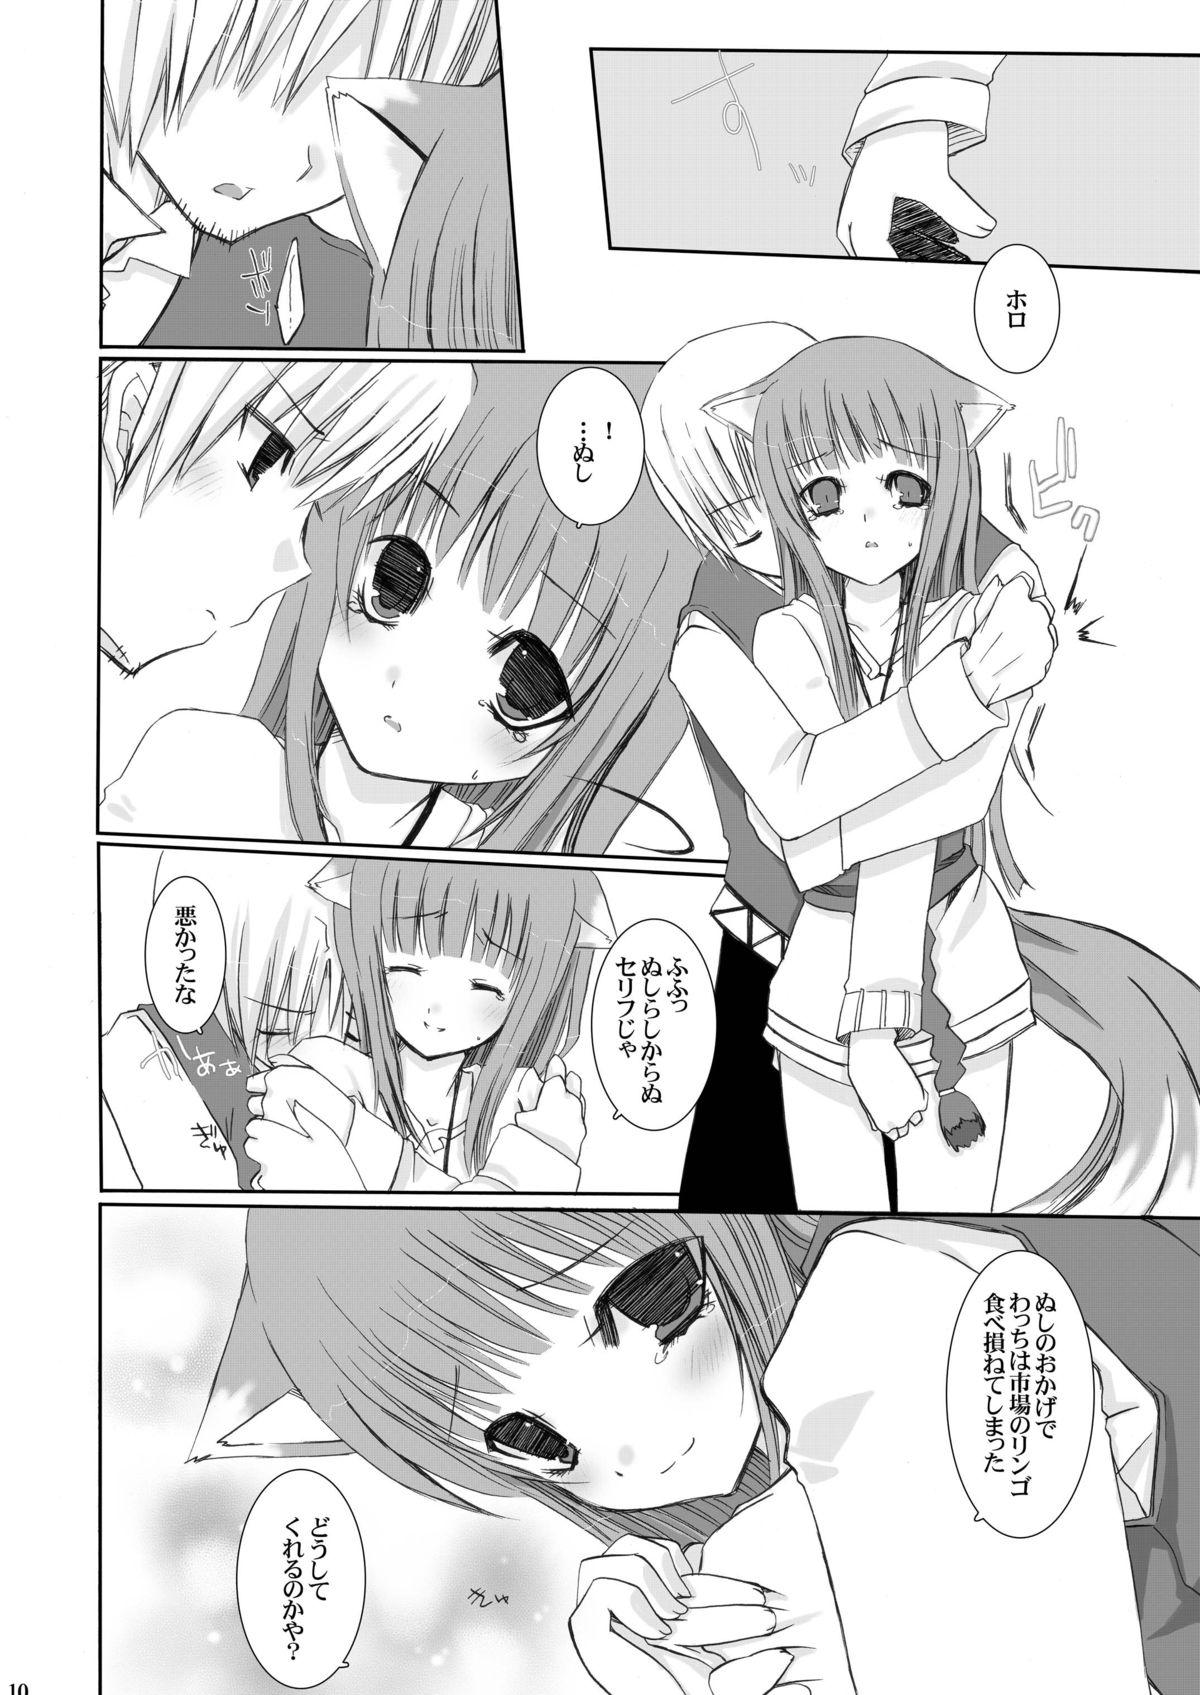 Gostoso Fukigen na Ookami - Spice and wolf Stretching - Page 10